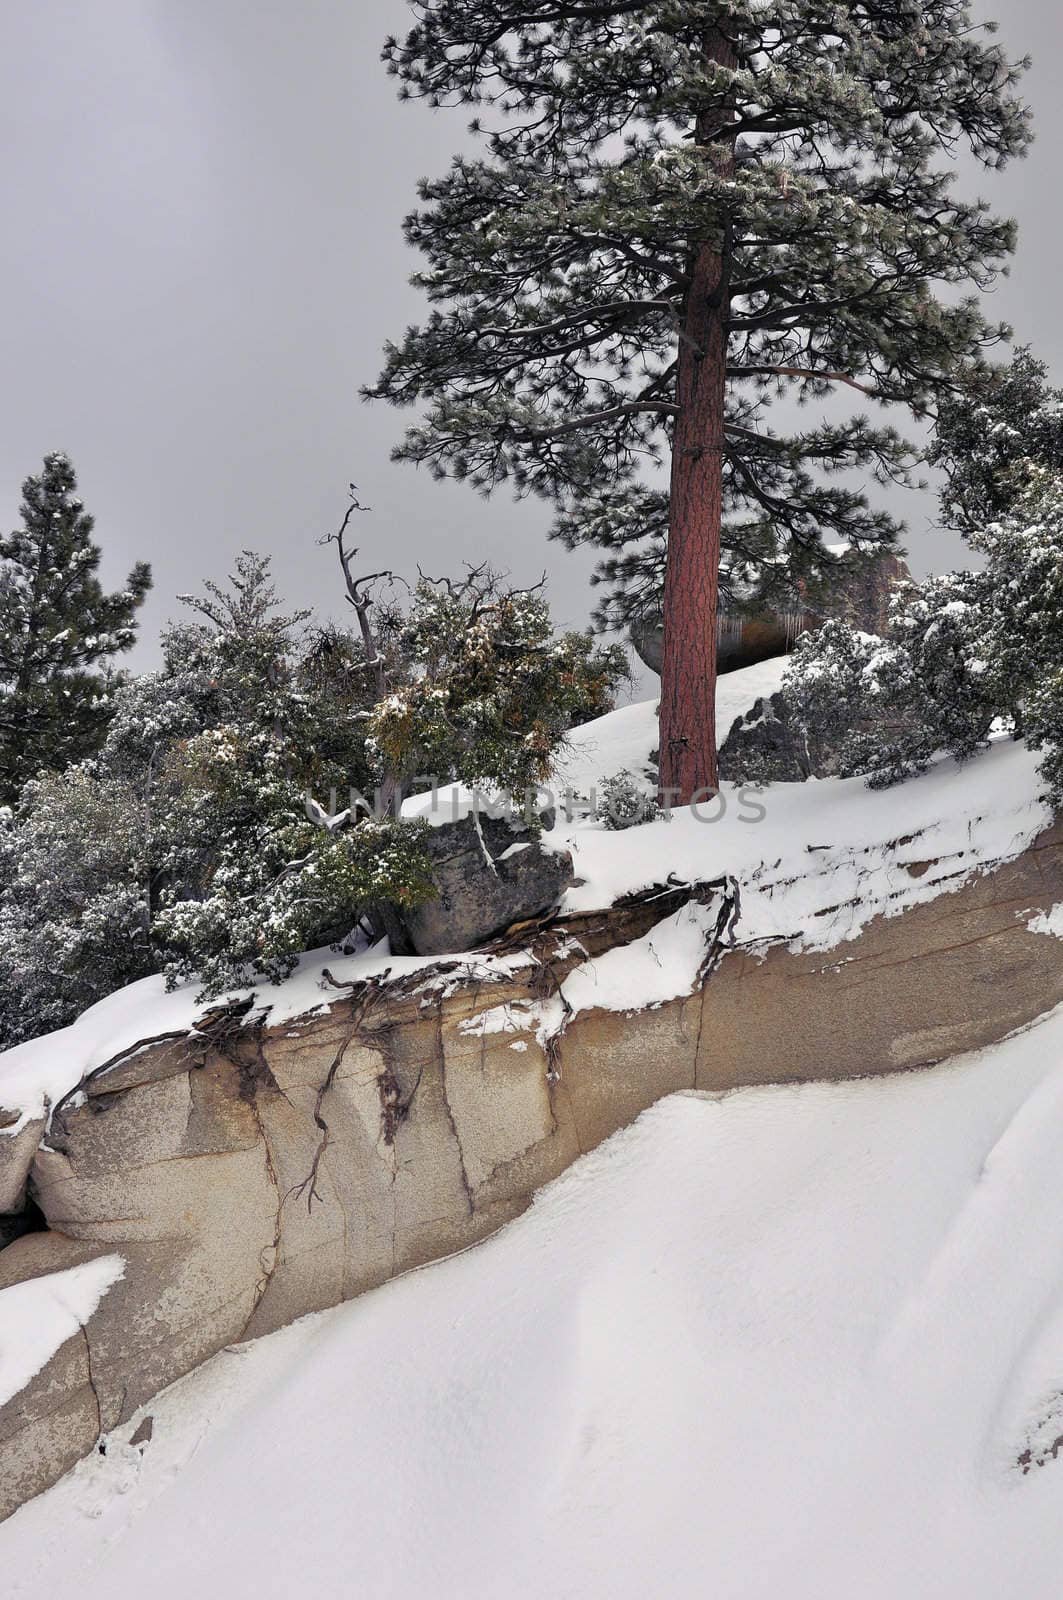 A lone pine tree grows on the side of a snowy slope on Mount San Jacinto in Southern California.